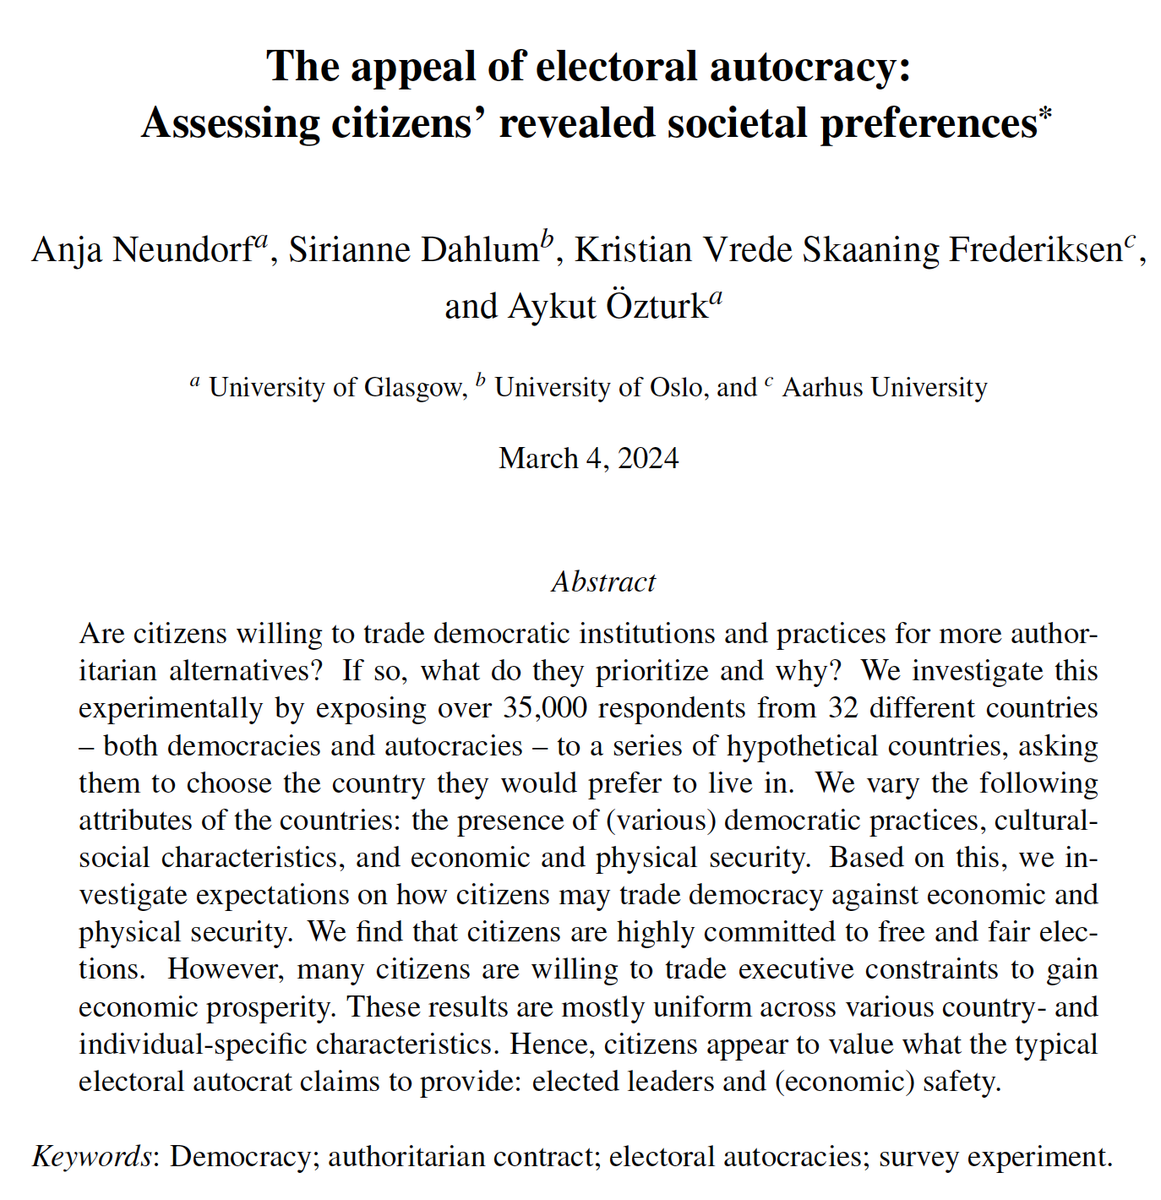 🚨New working paper: Based on a conjoint experiment from 32 countries, citizens - quite uniformly - value what the typical electoral autocrat claims to provide: elected leaders & (economic) safety, while commitment to executive constraints is much weaker. osf.io/preprints/osf/…